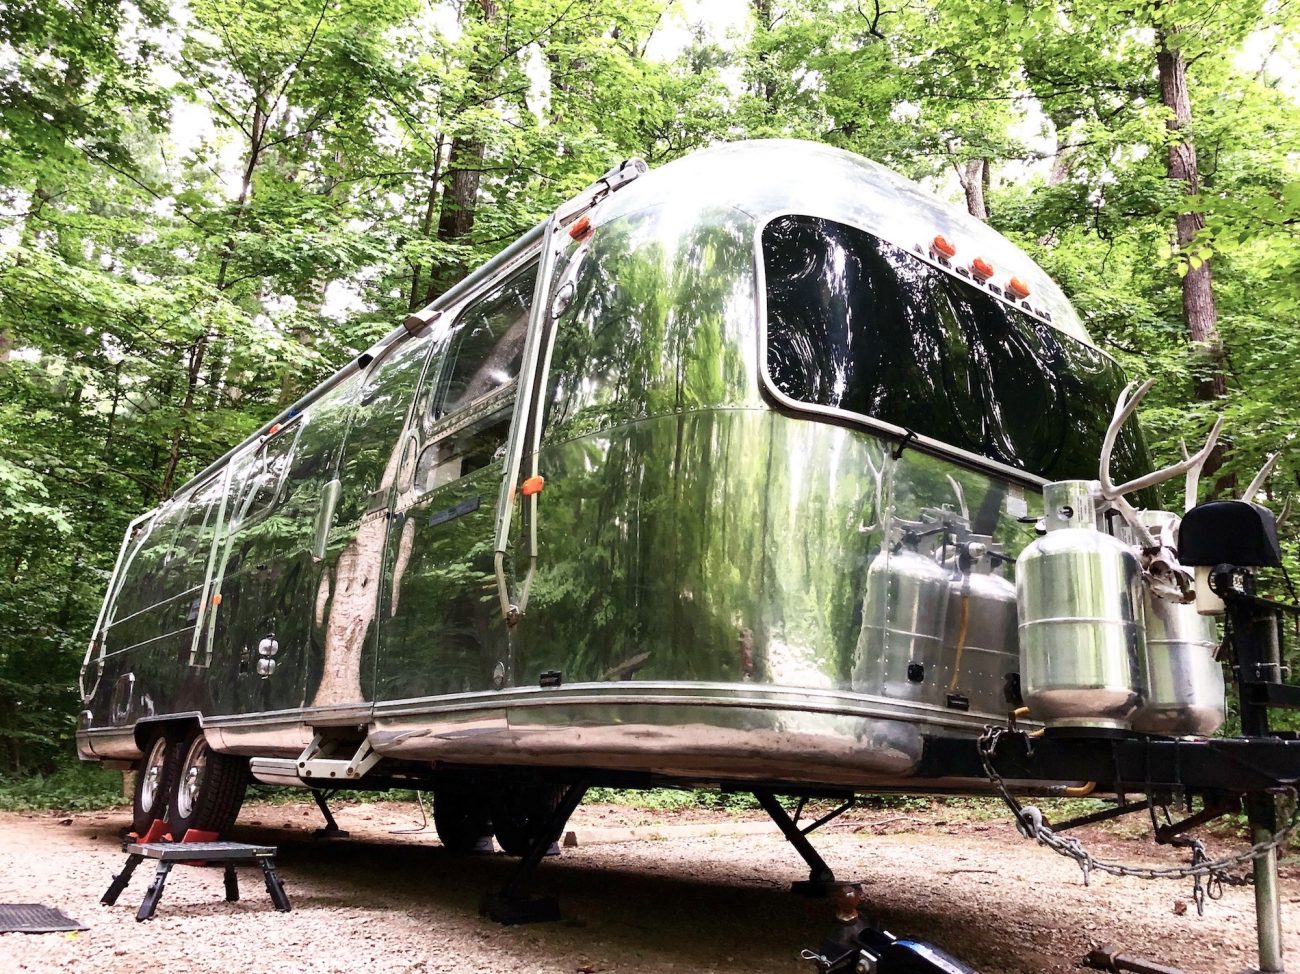 Lifted Airstream